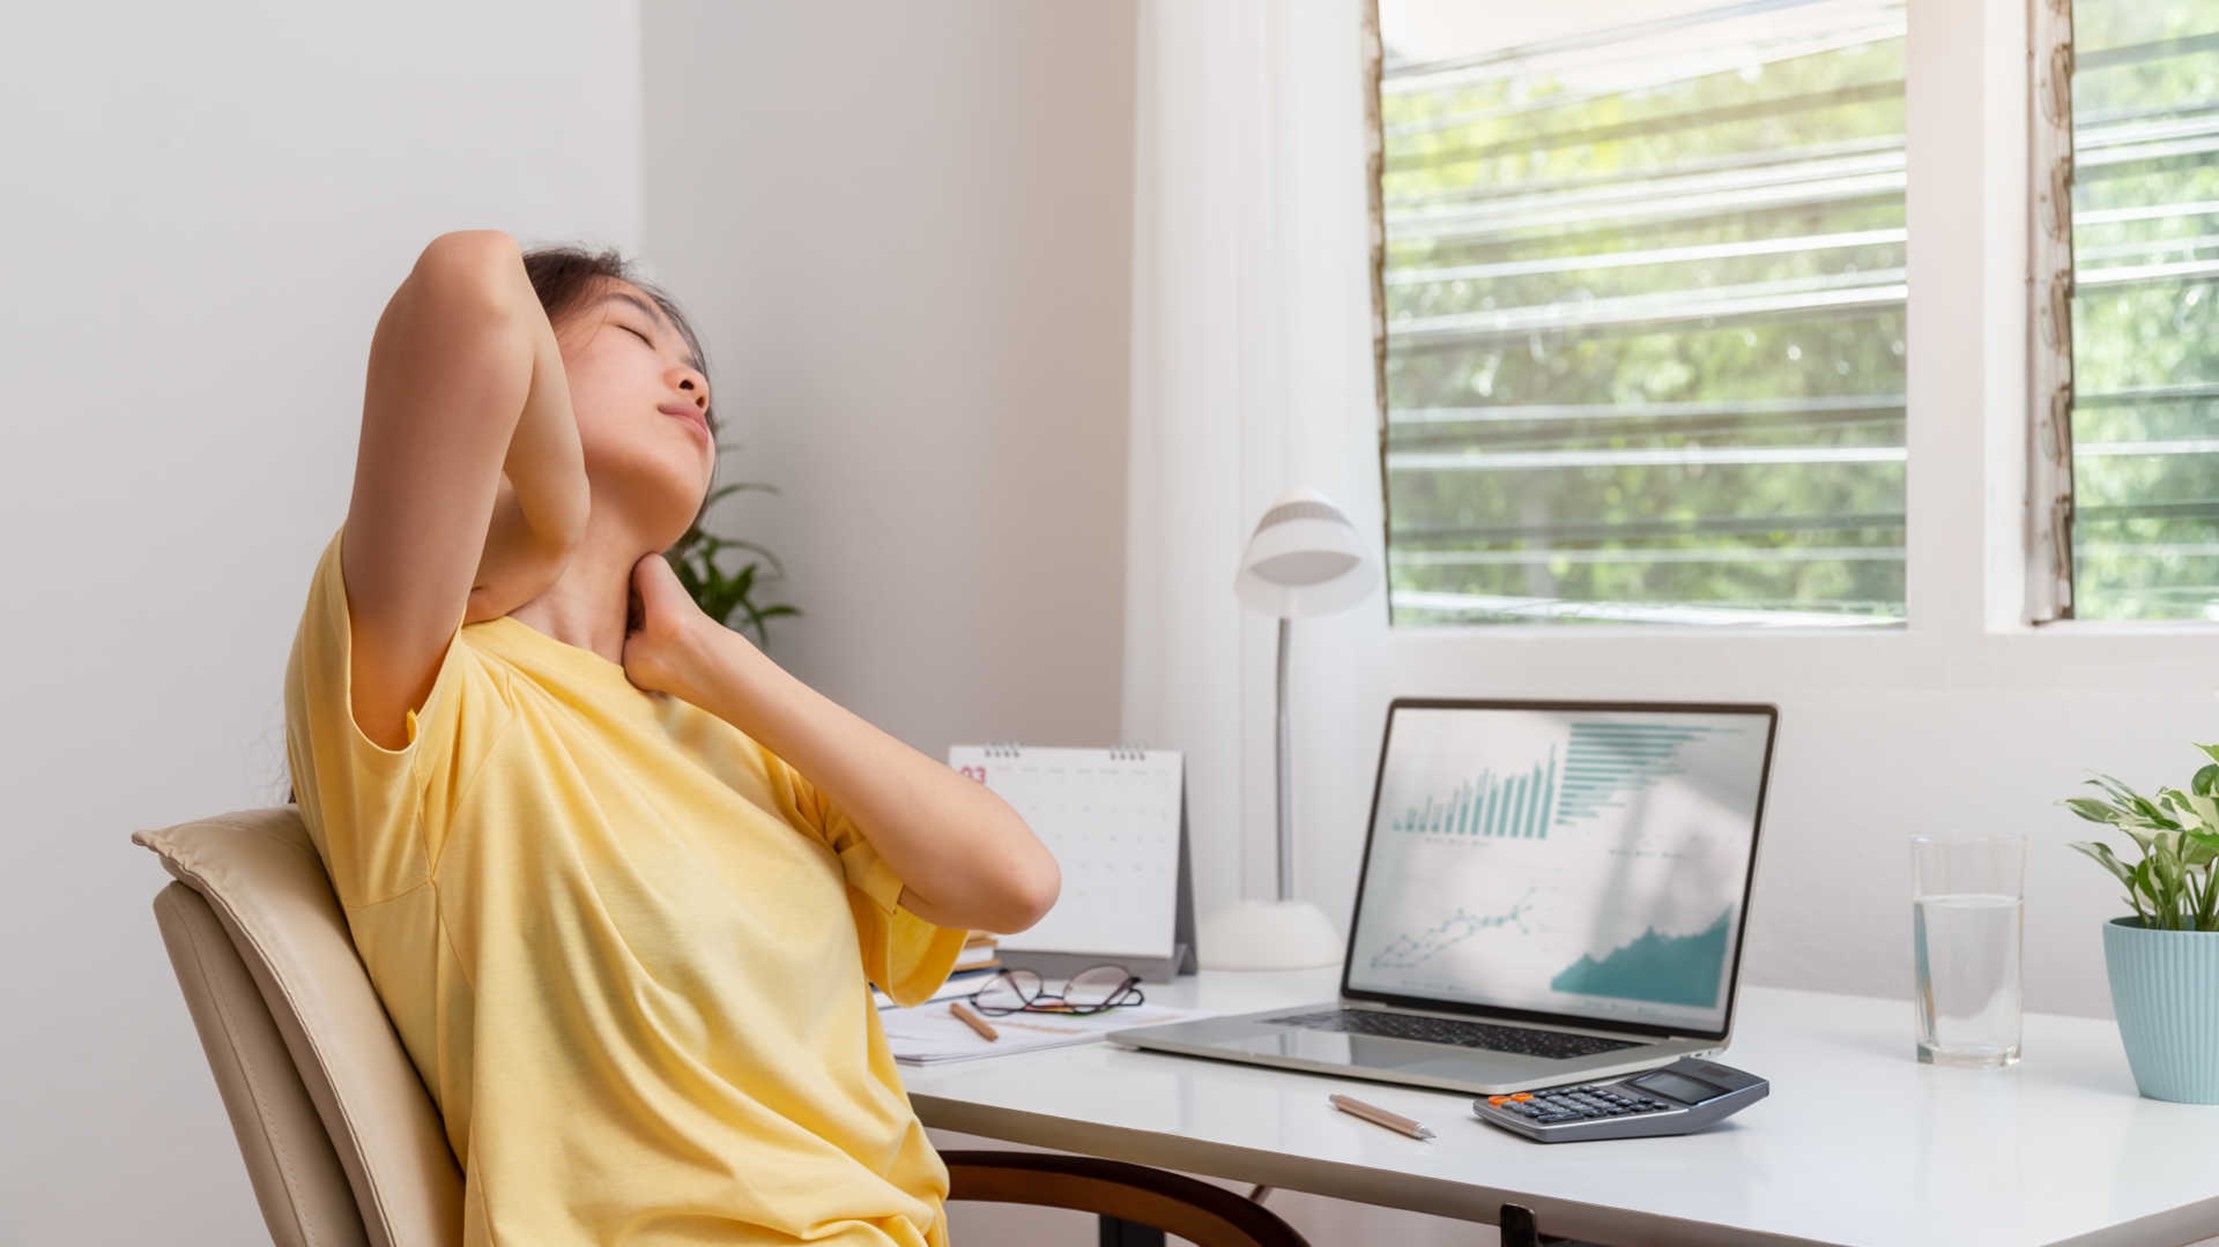 A woman is experiencing chronic neck pain caused by not using ergonomic chairs.